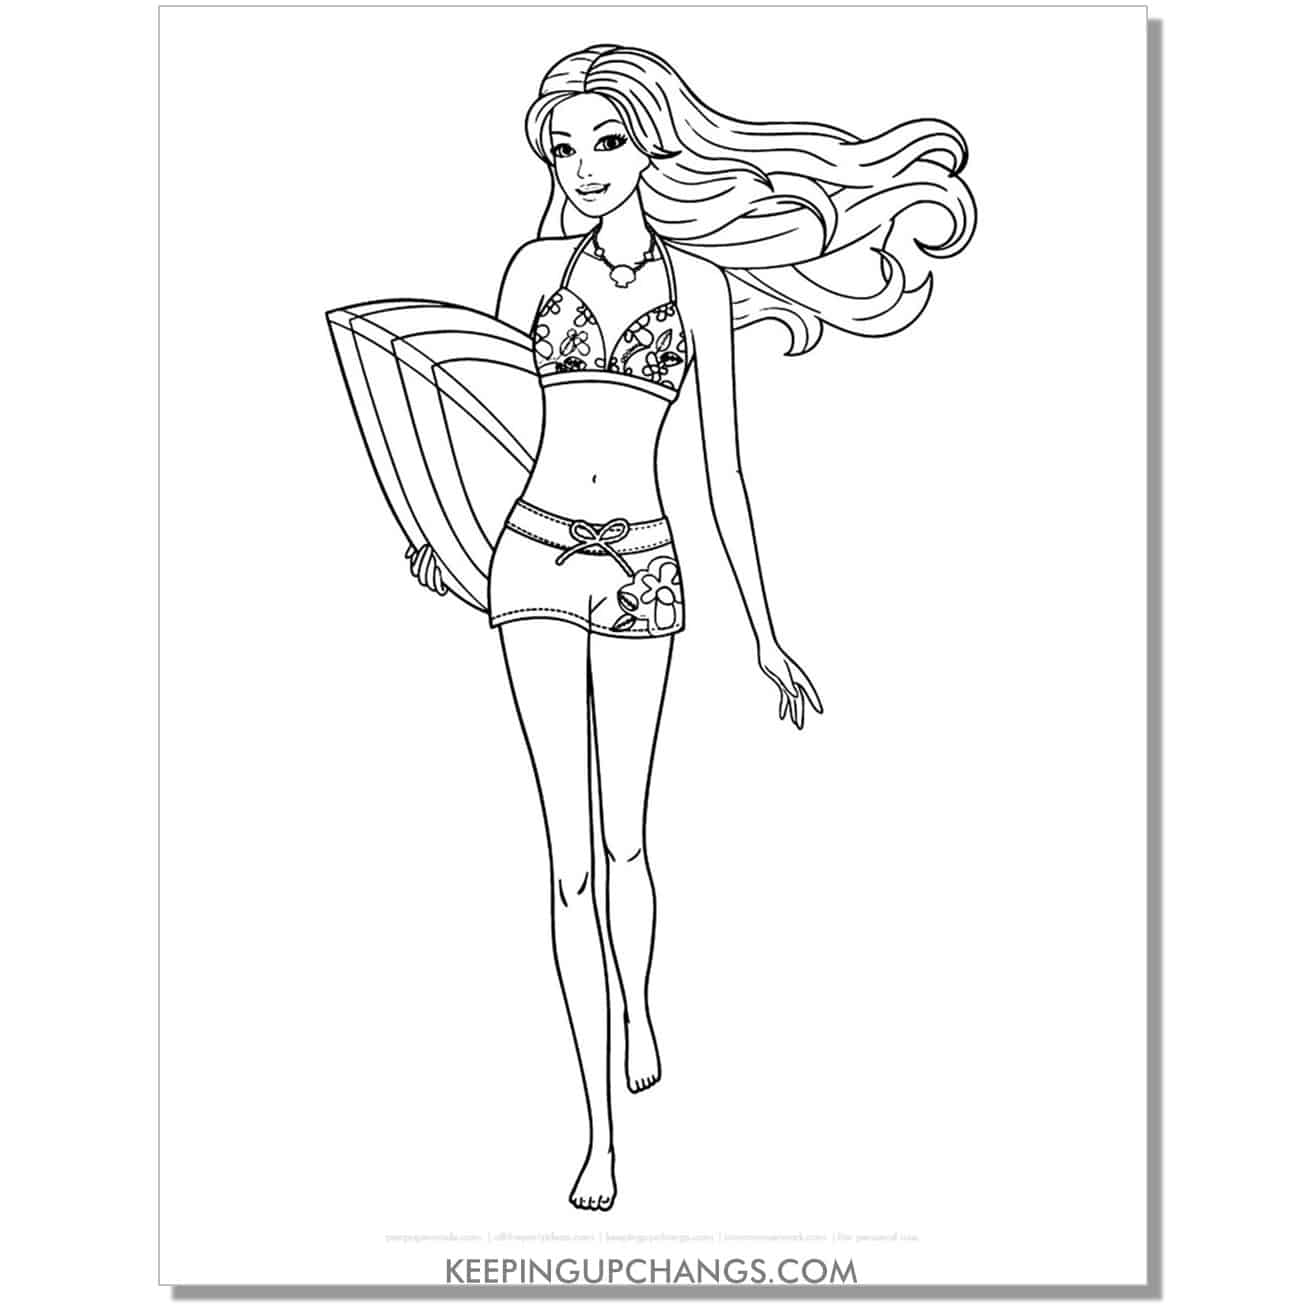 barbie in flower bikini with surfboard under arm coloring page.